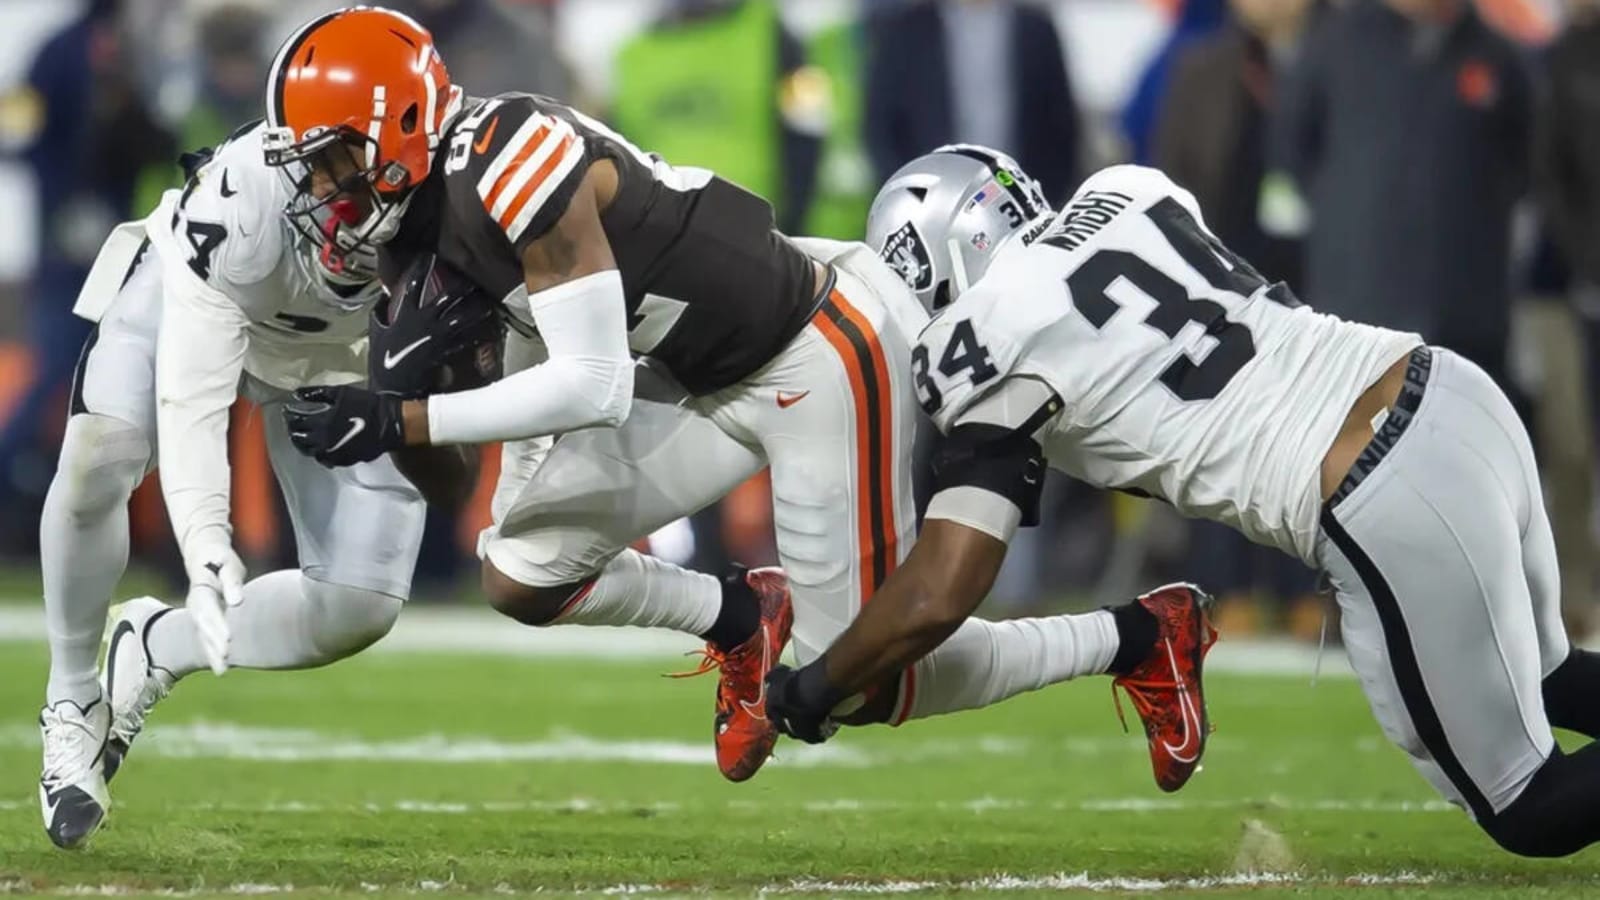 Two former Browns fan favorite players retire after signing short contracts in Cleveland